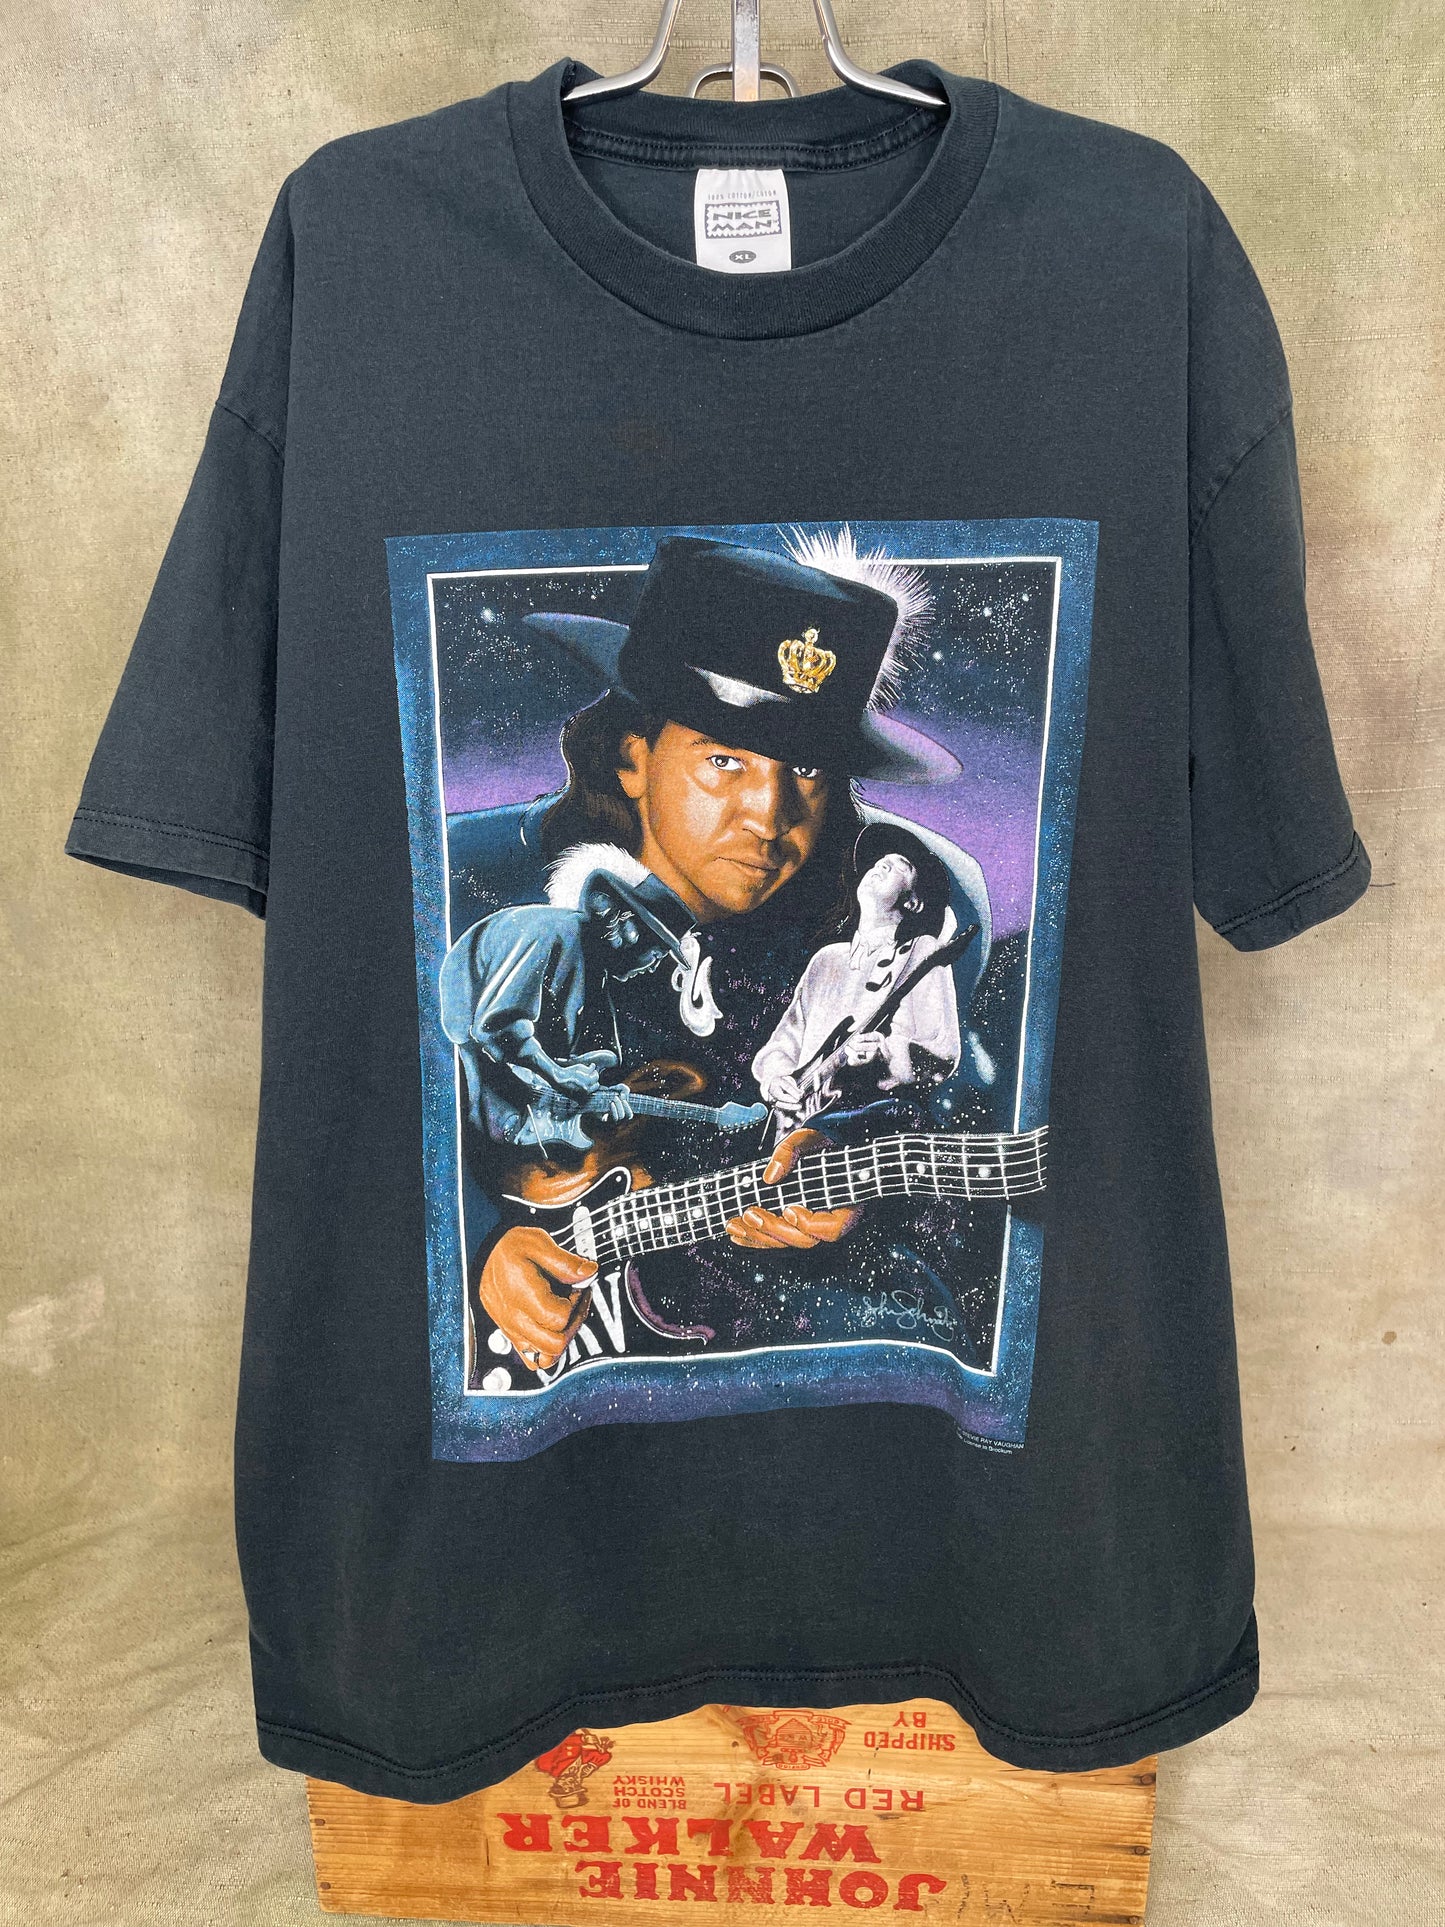 Vintage 90s Stevie Ray Vaughan Band Concert Tribute Shirt